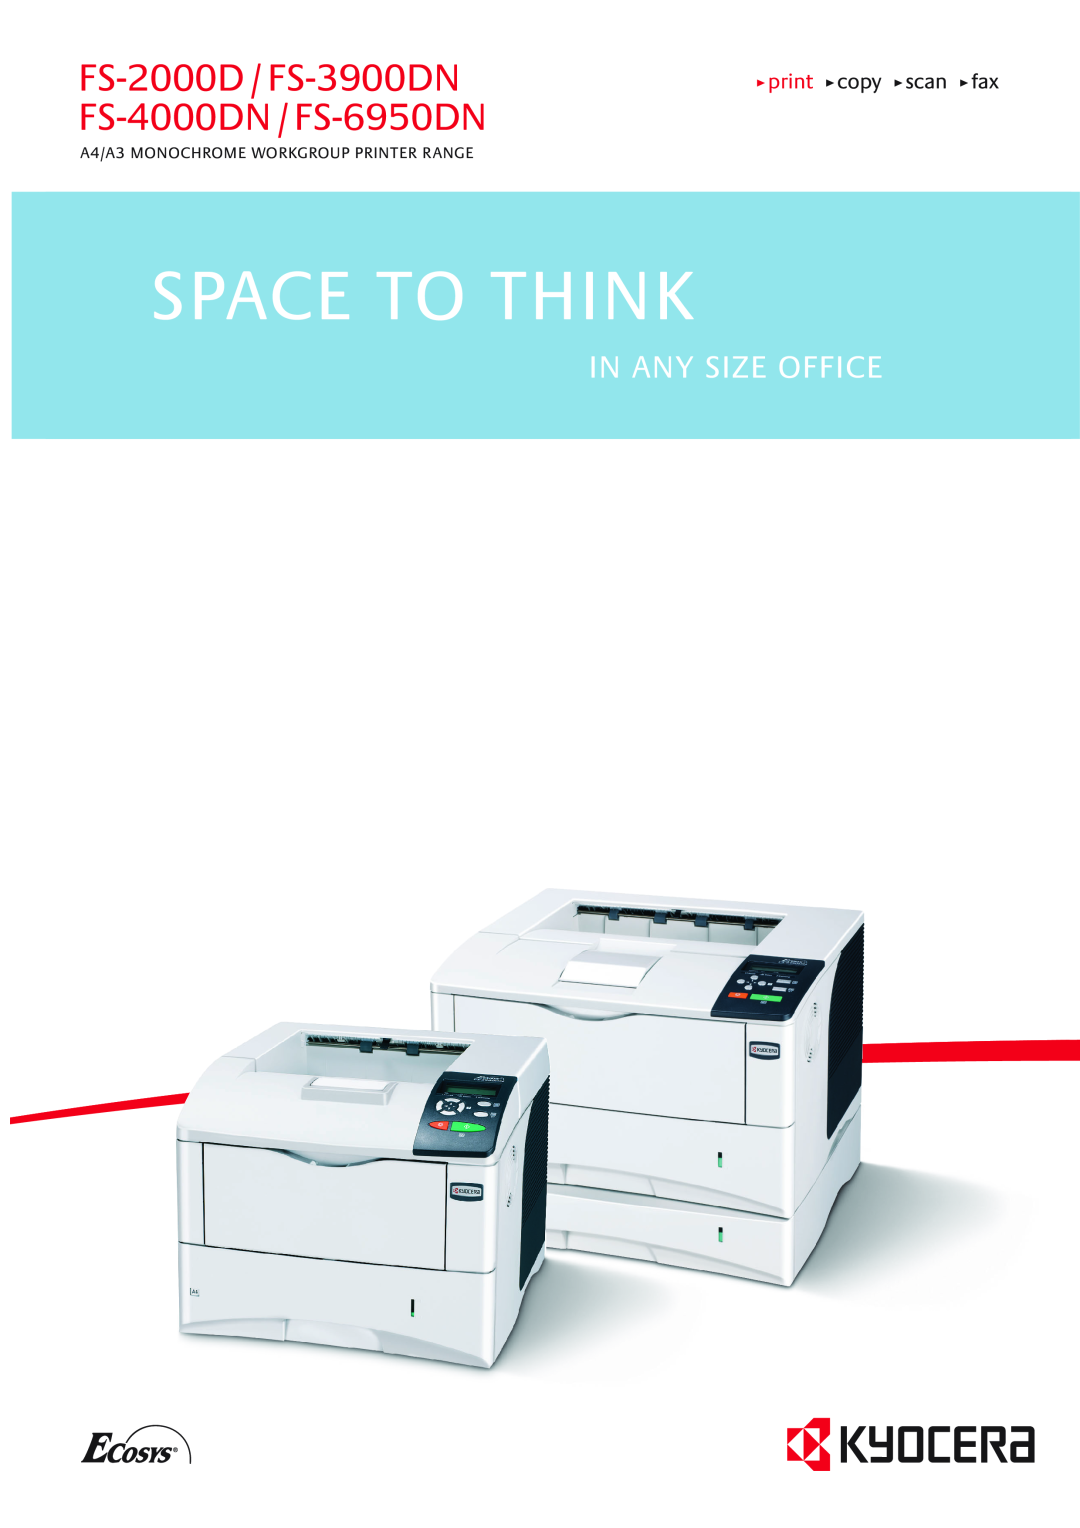 Kyocera manual Space To Think, FS-2000D / FS-3900DN FS-4000DN / FS-6950DN, In Any Size Office, print copy scan fax 